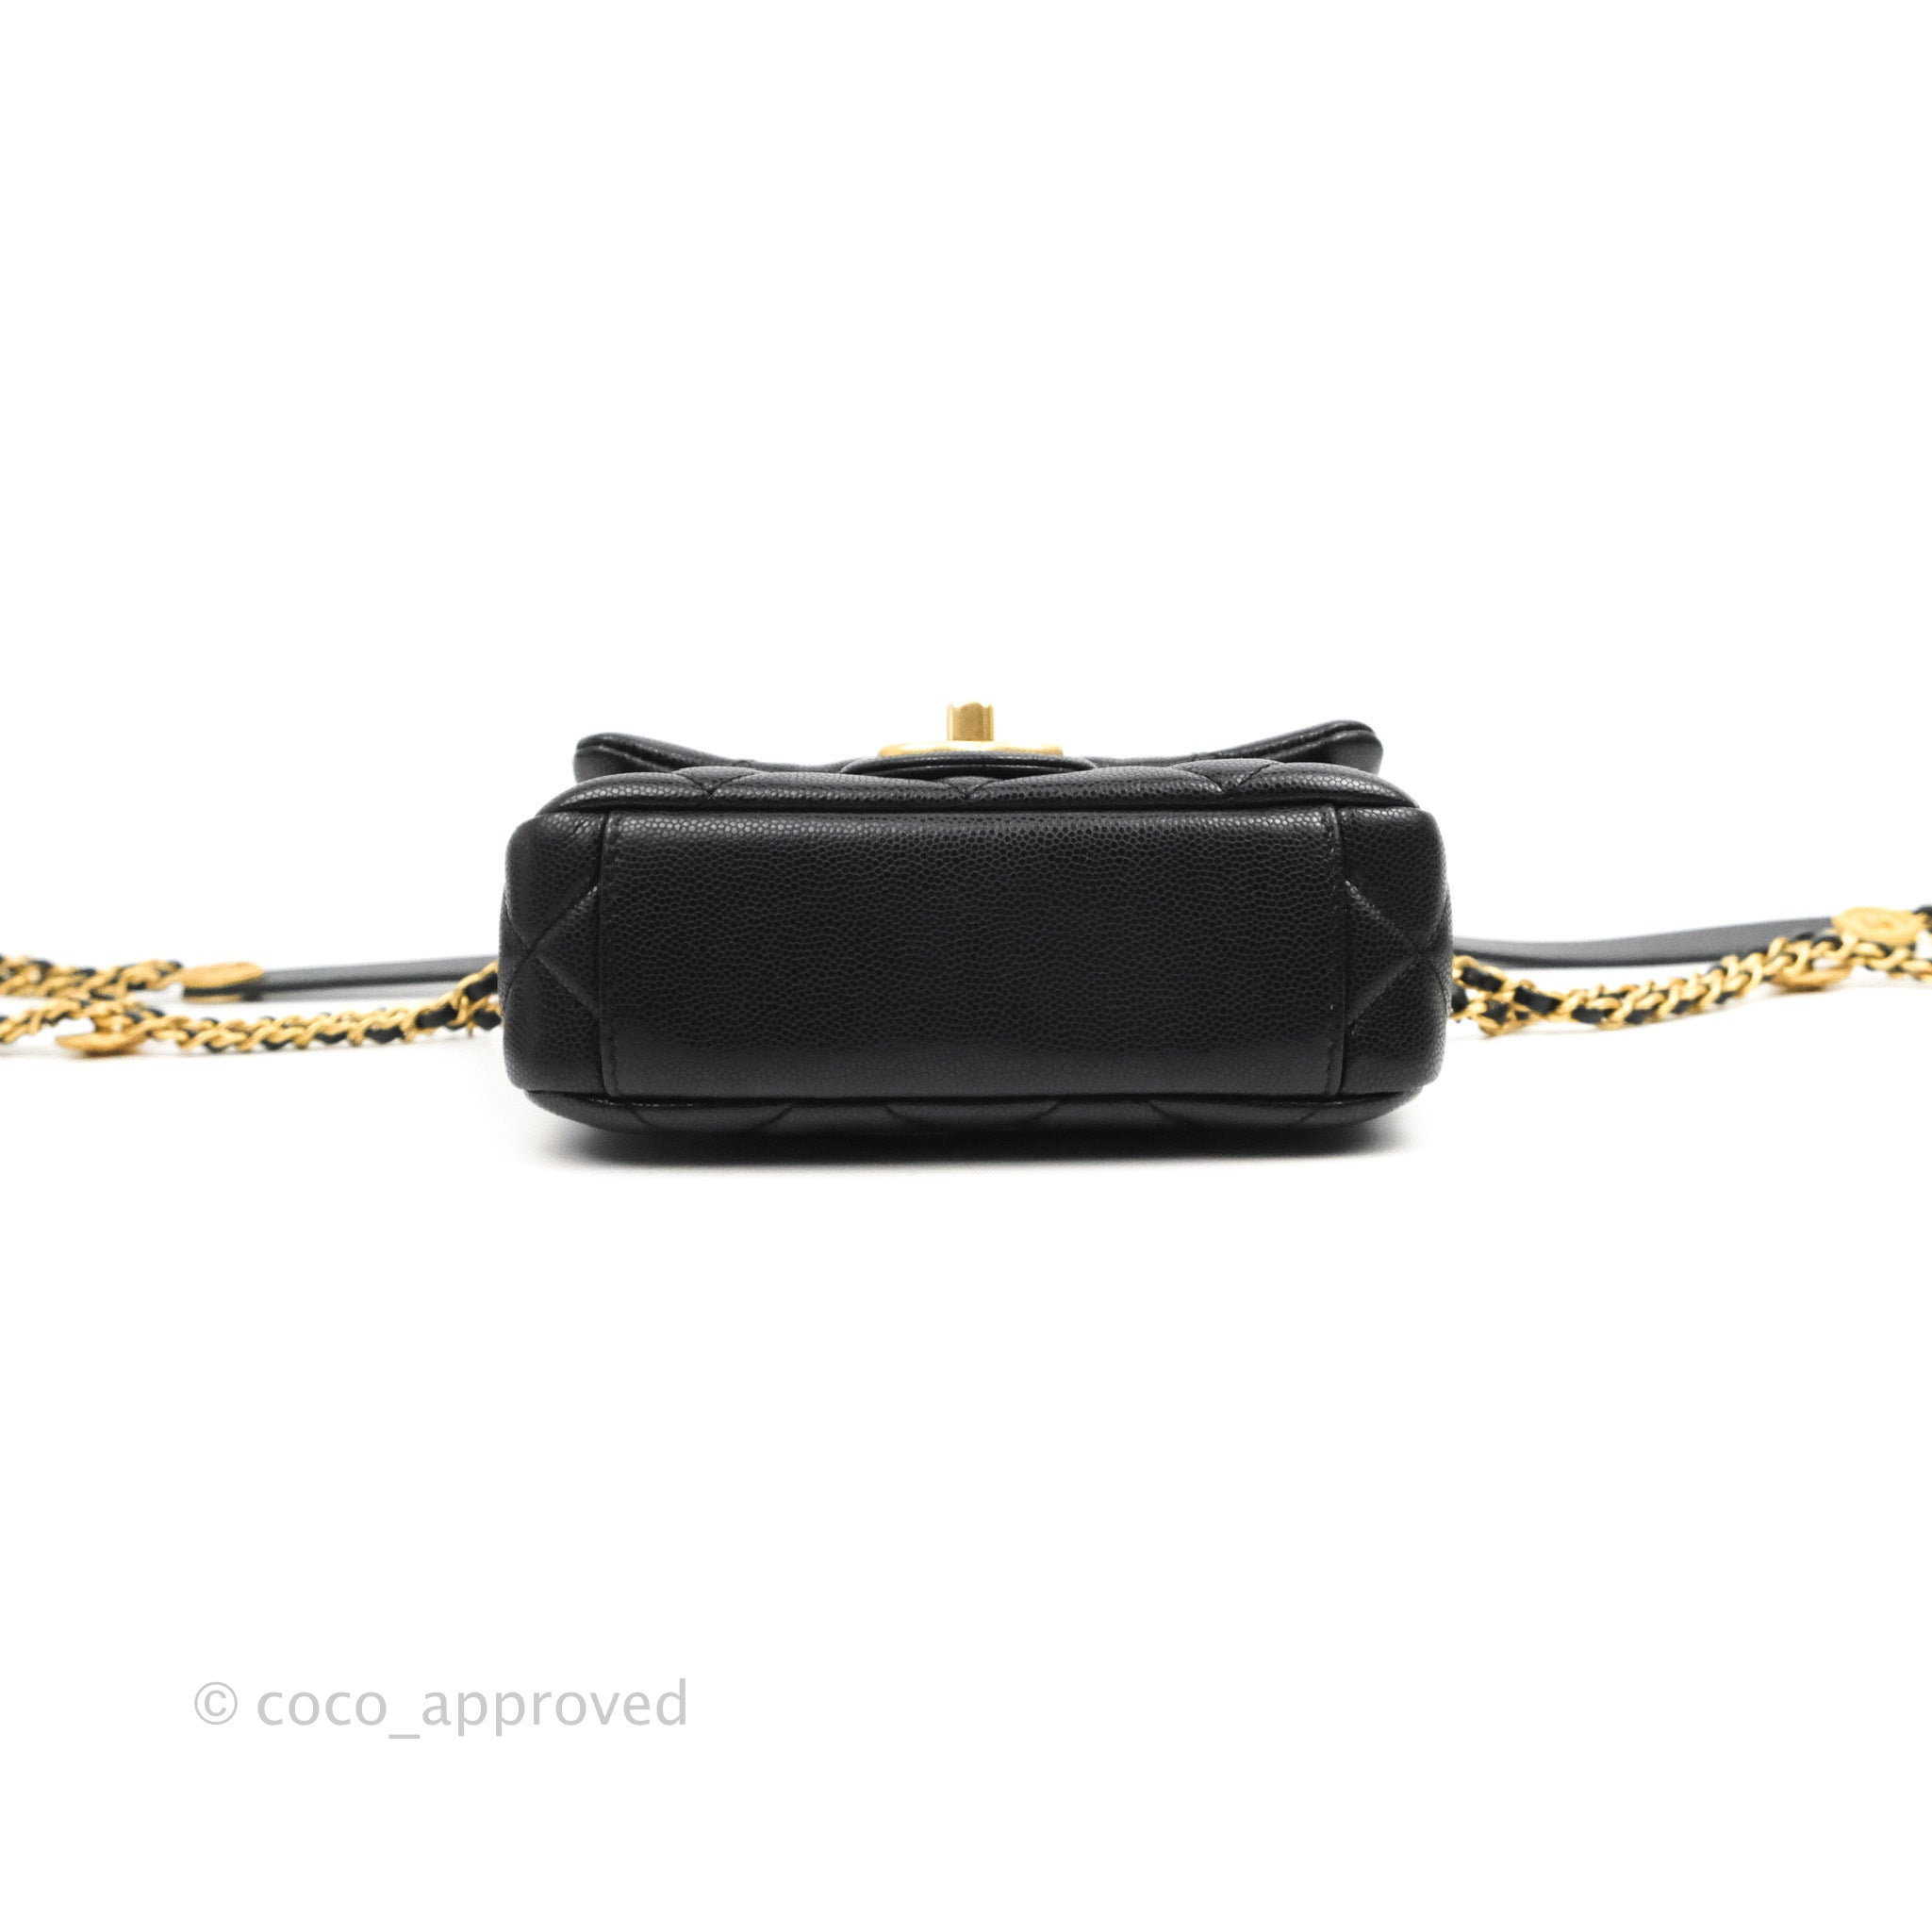 CHANEL 22A Gold Coins Small Flap Bag in Black Caviar